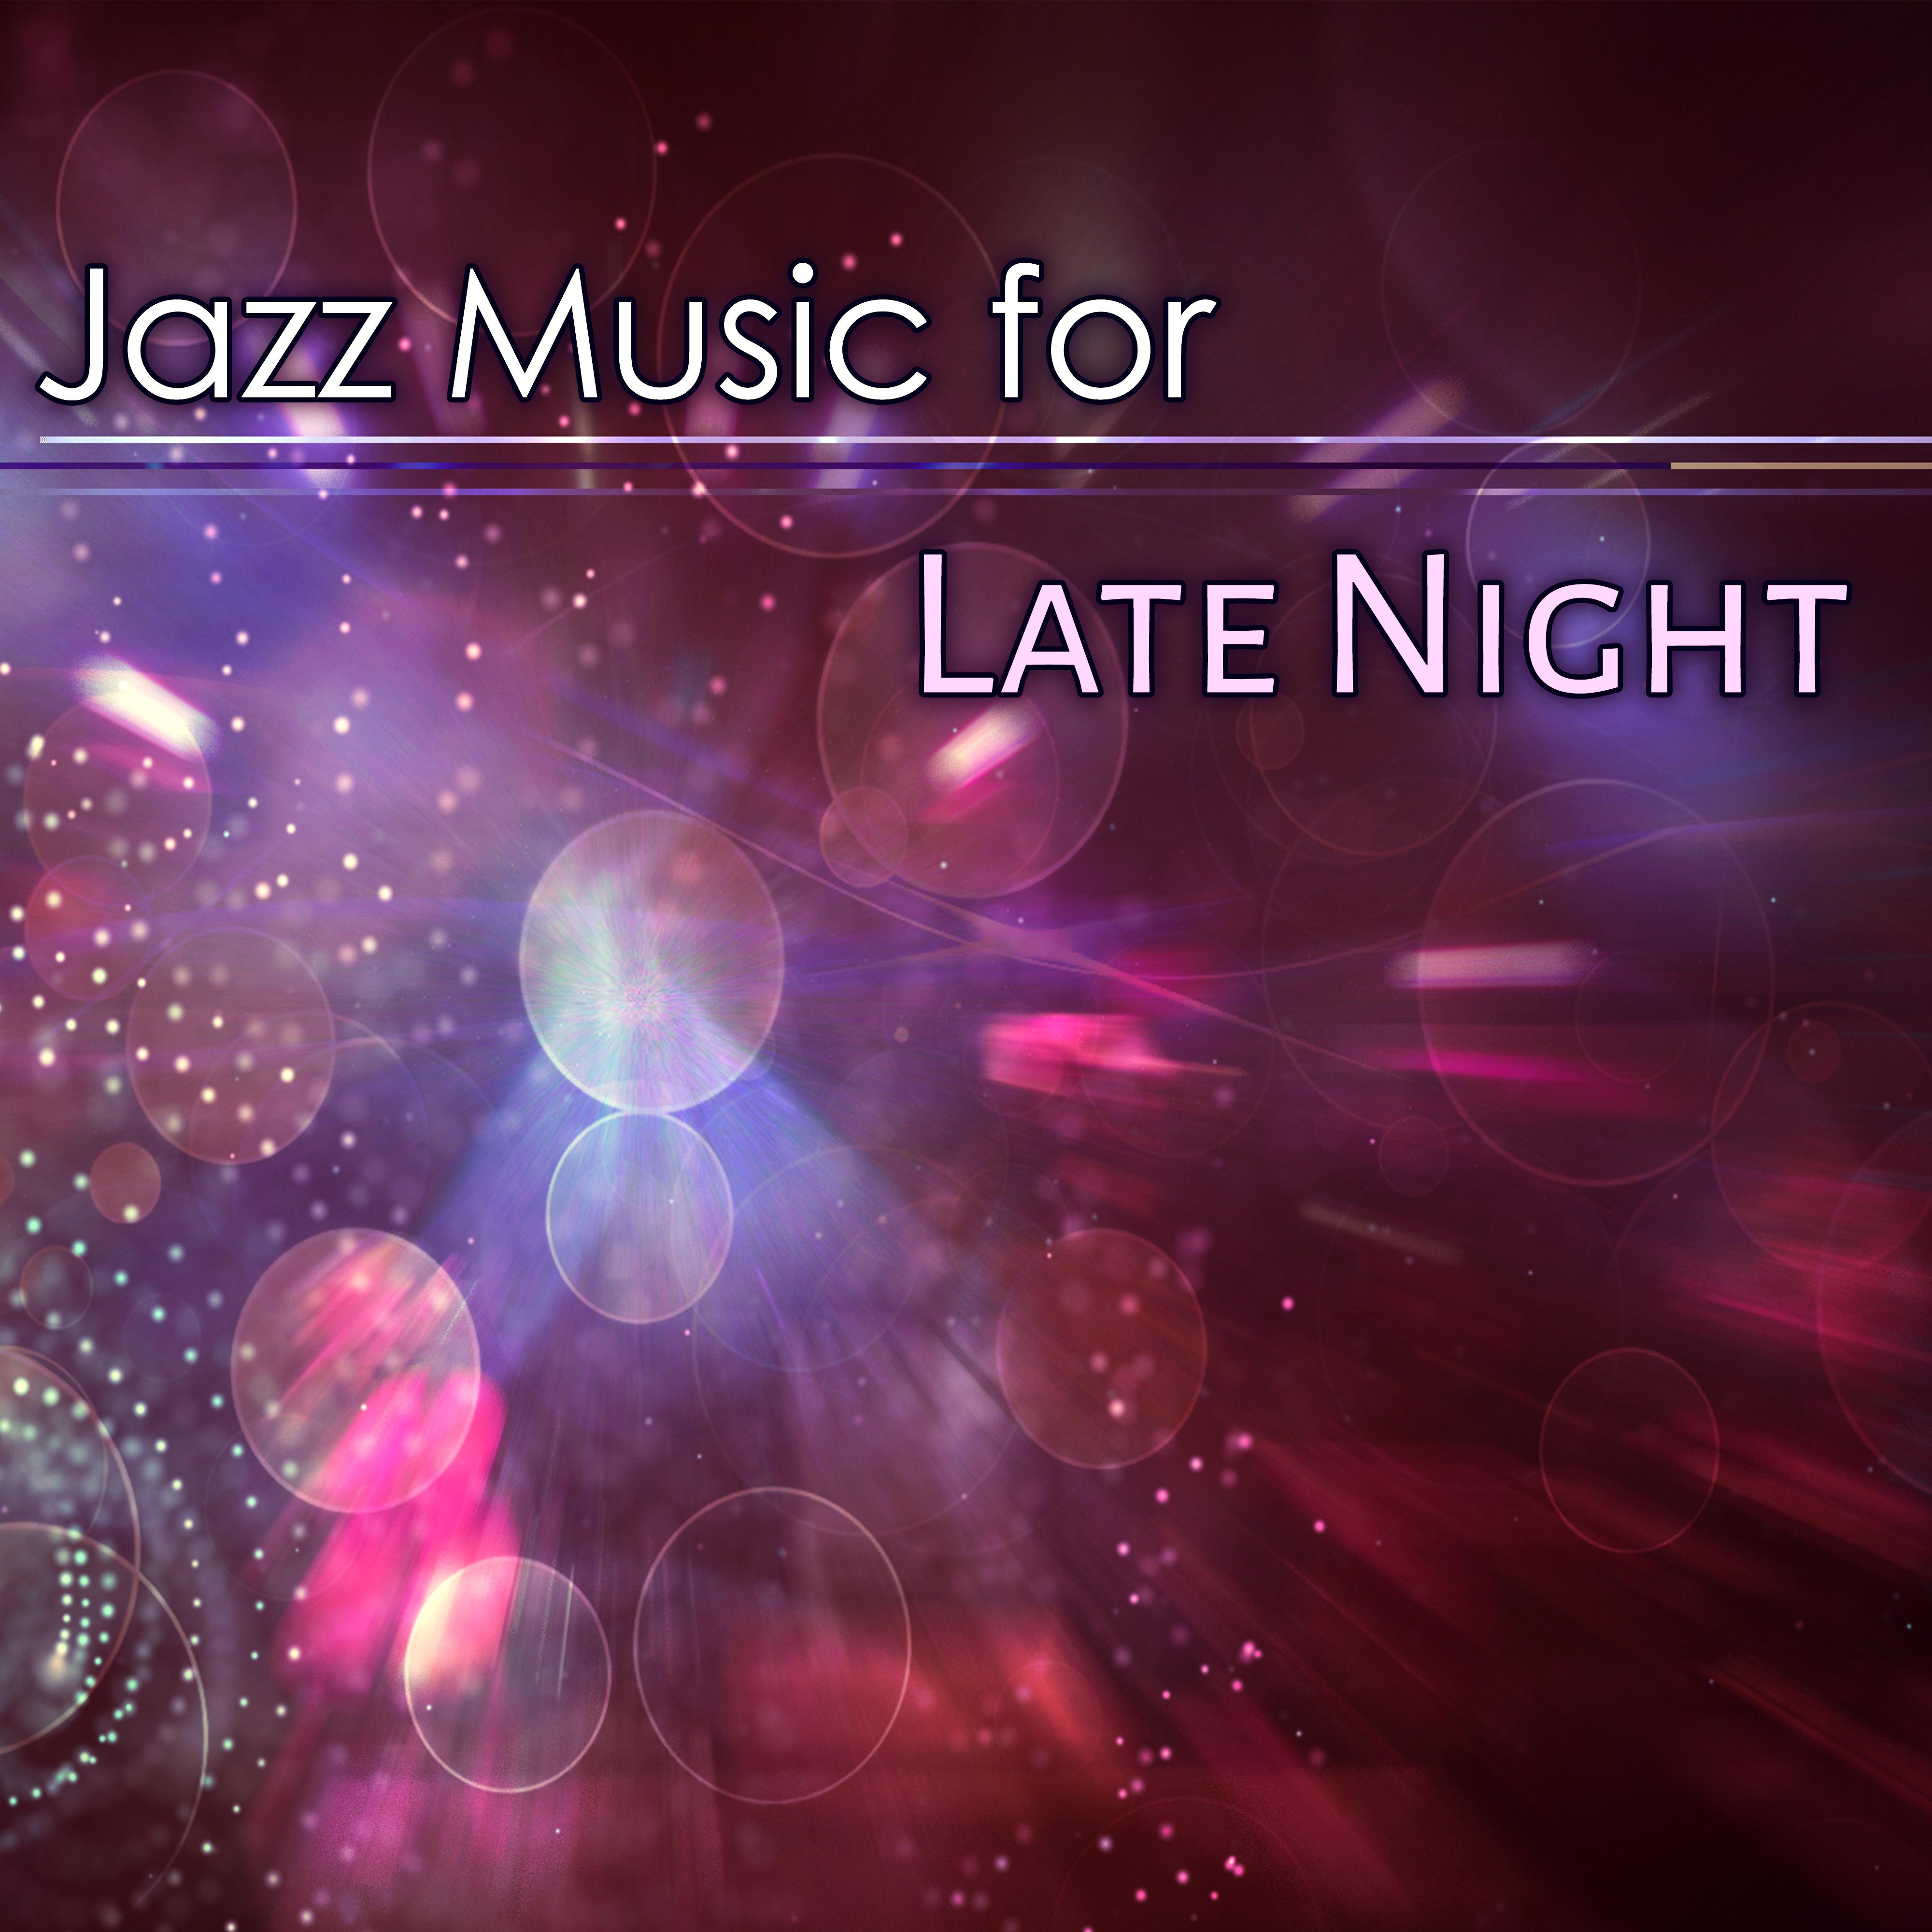 Jazz Music for Late Night – Shades of Jazz, Calming Piano Note, Relaxing Sounds, Music to Rest